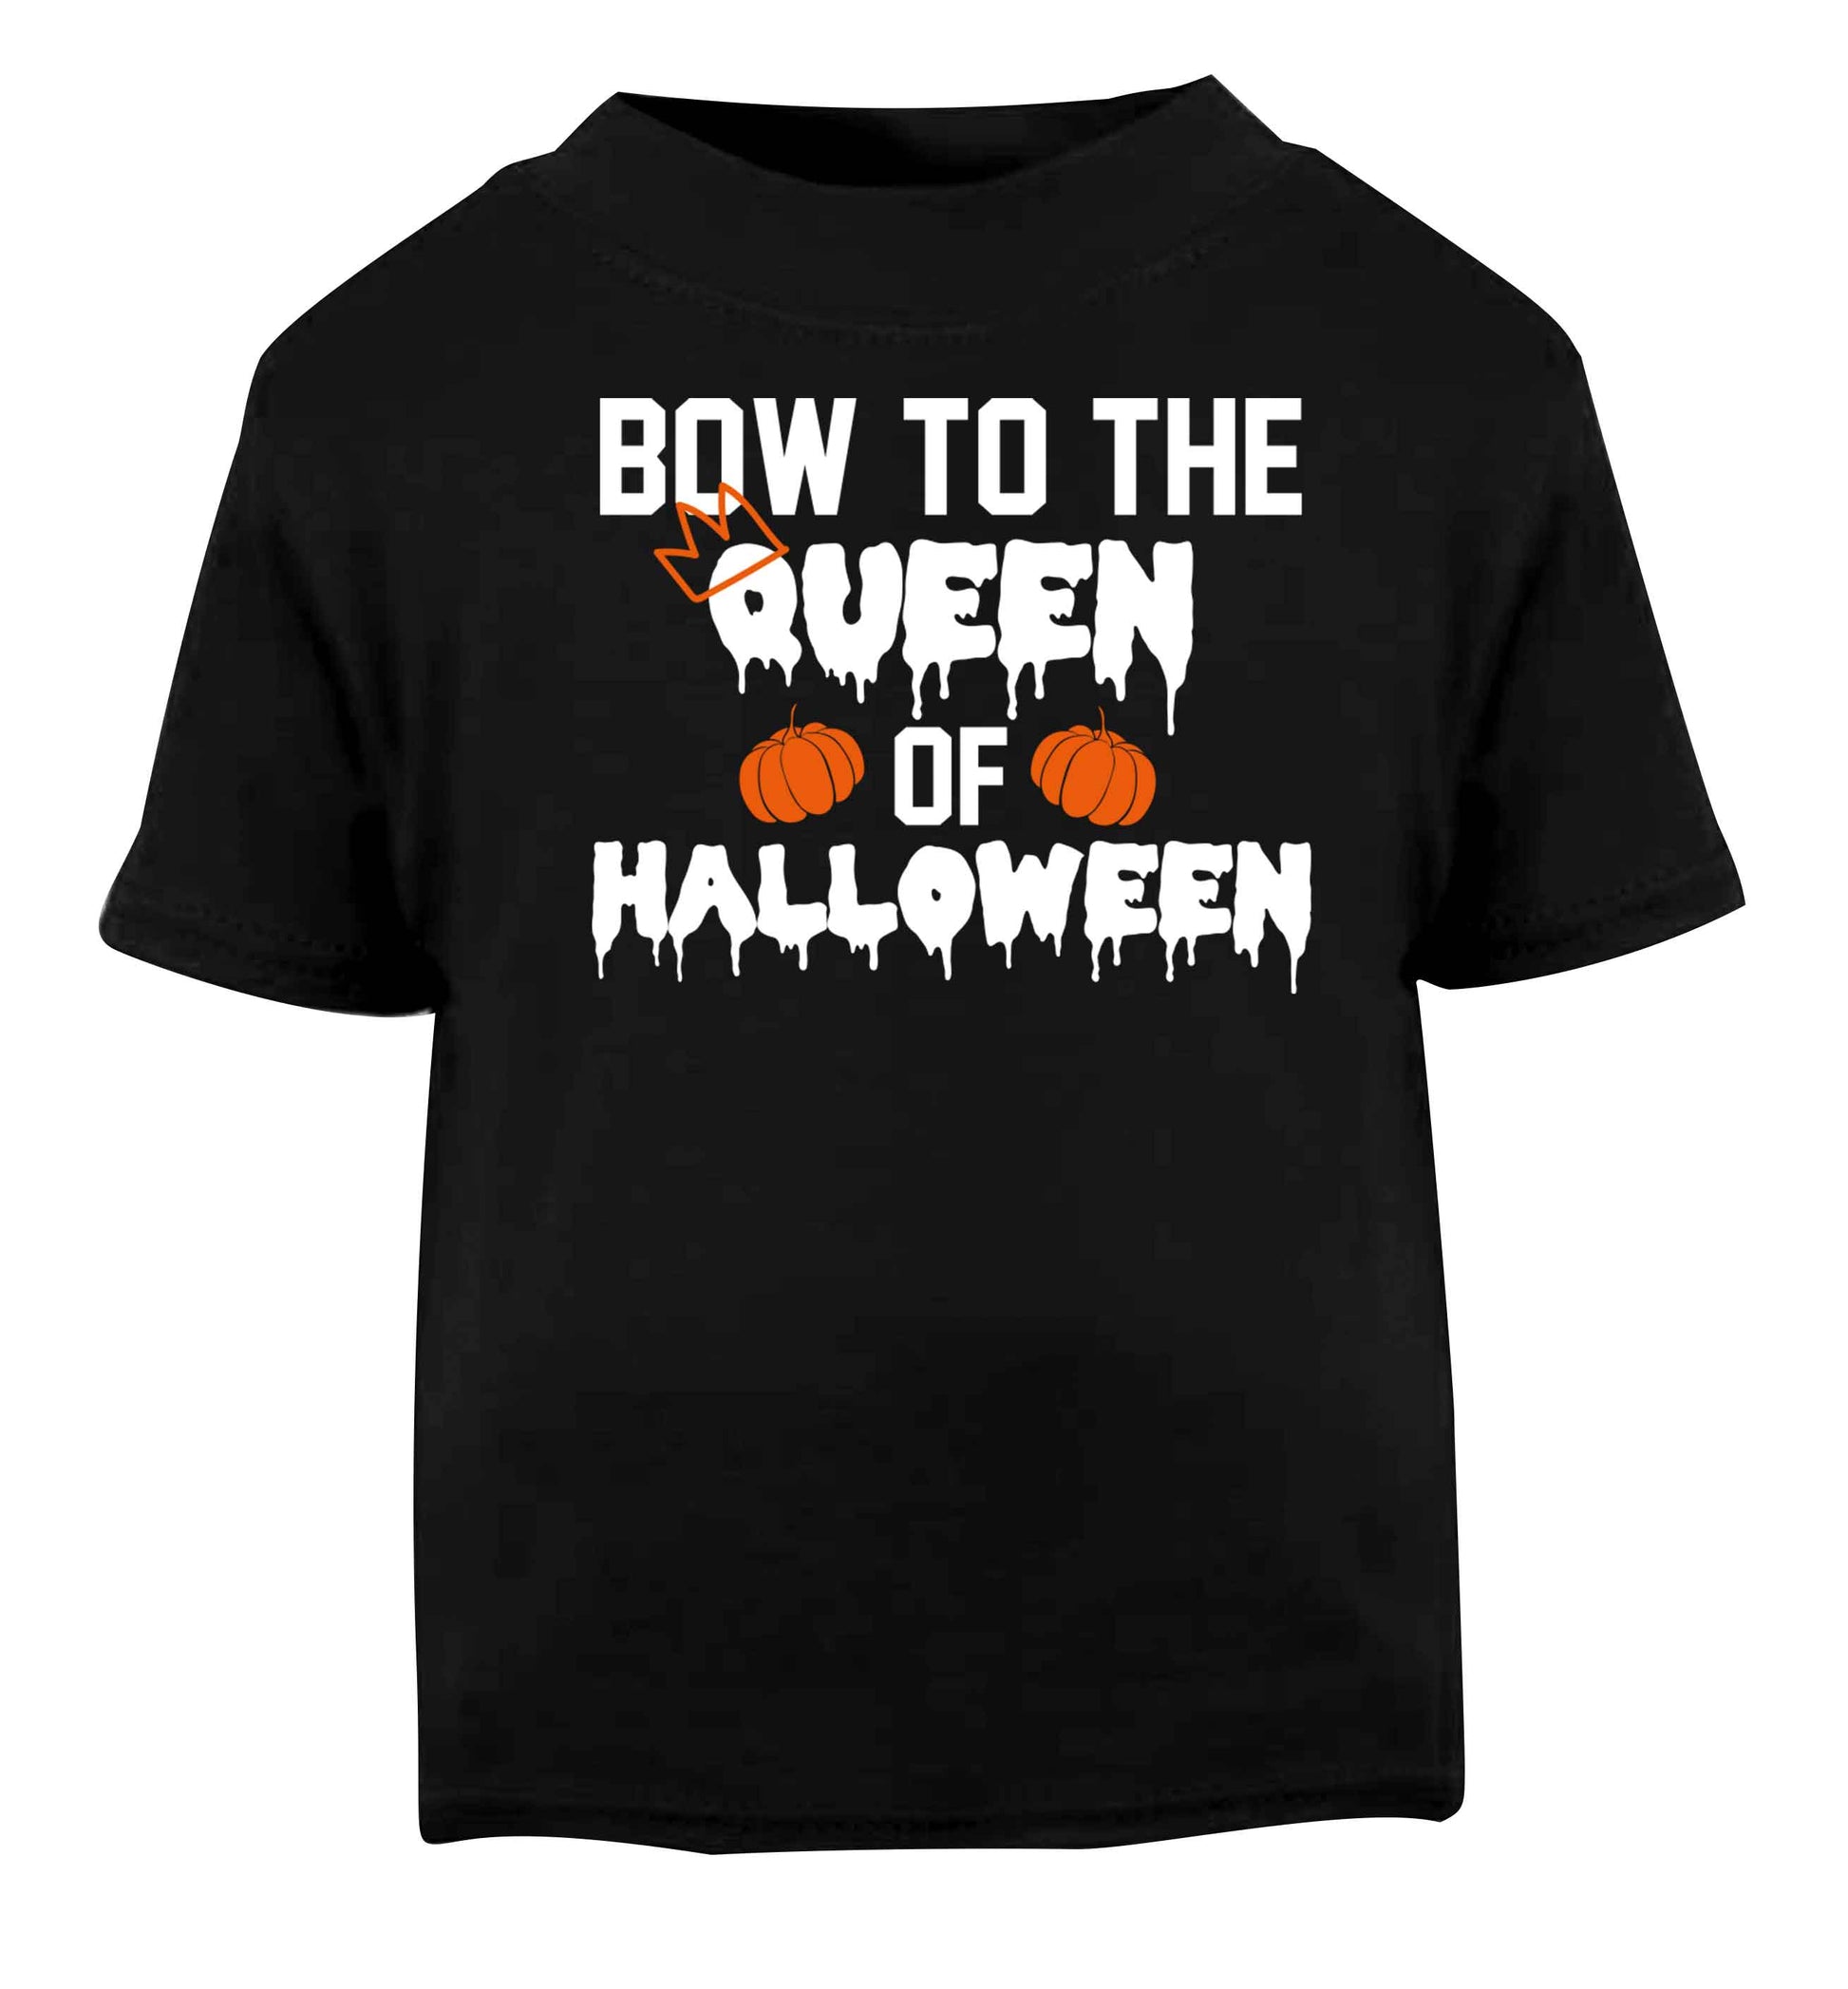 Bow to the Queen of halloween Black baby toddler Tshirt 2 years